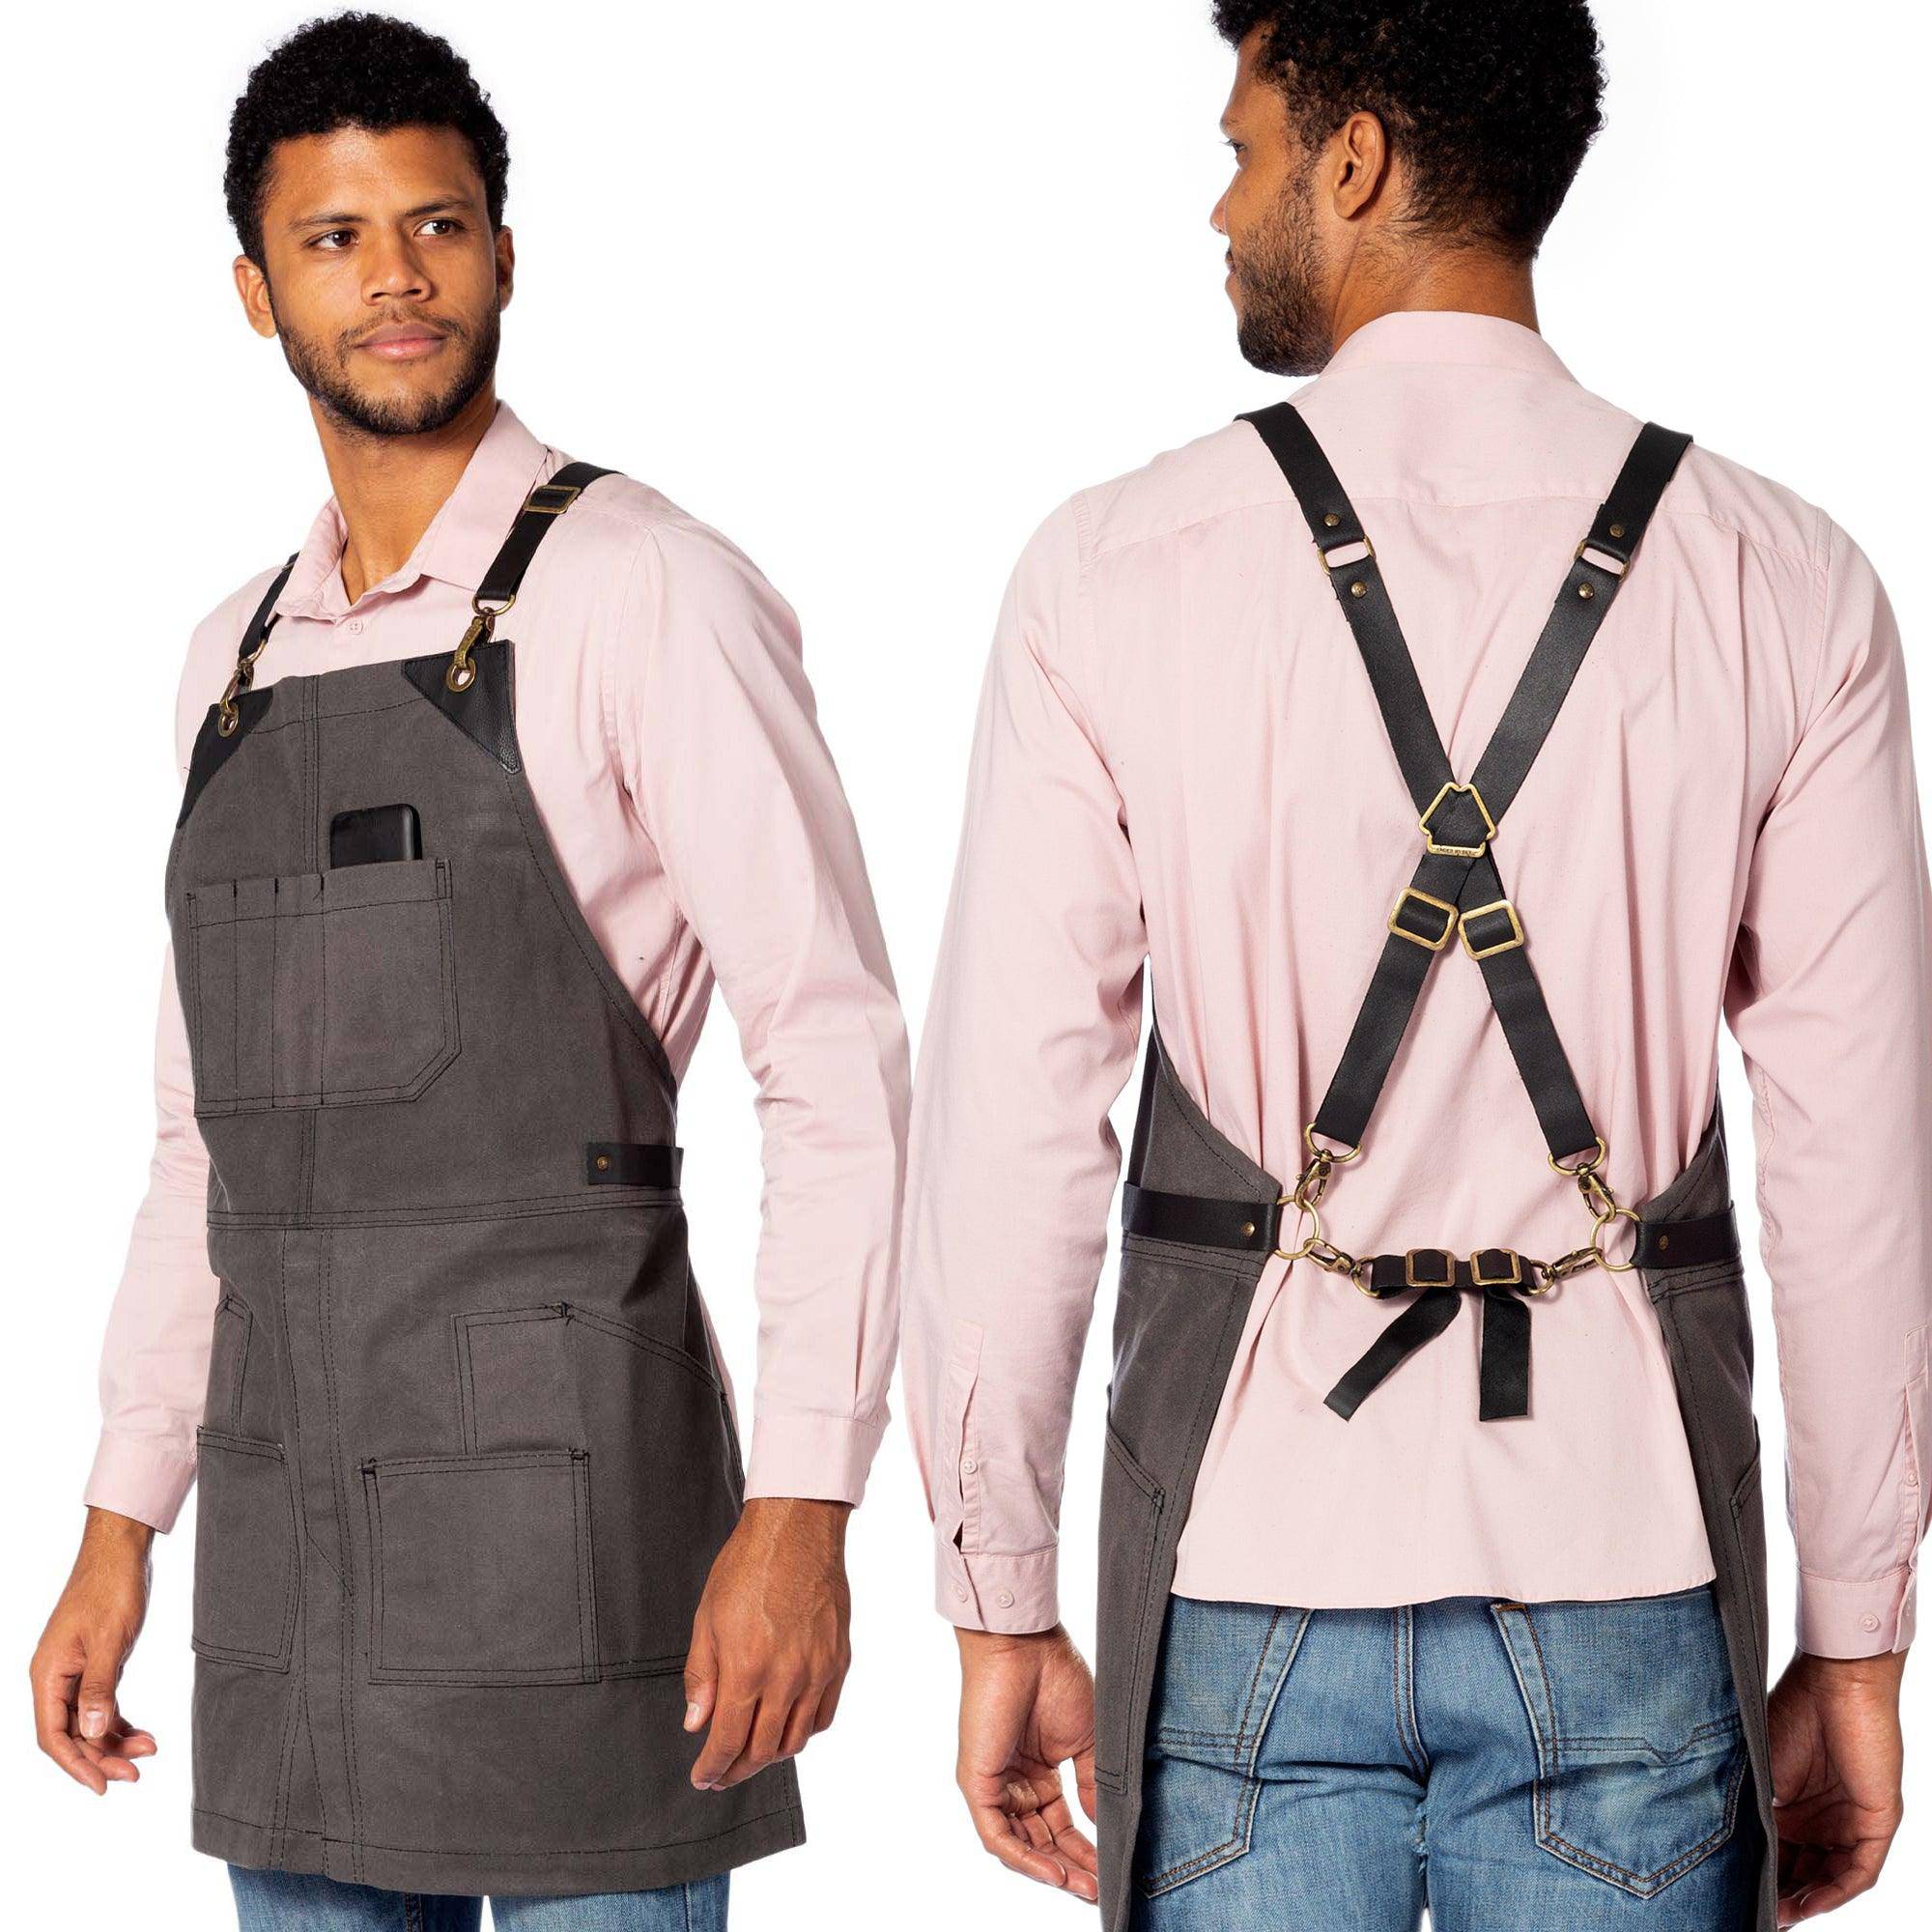 XL Cross-Strap Apron – Deluxe Leather